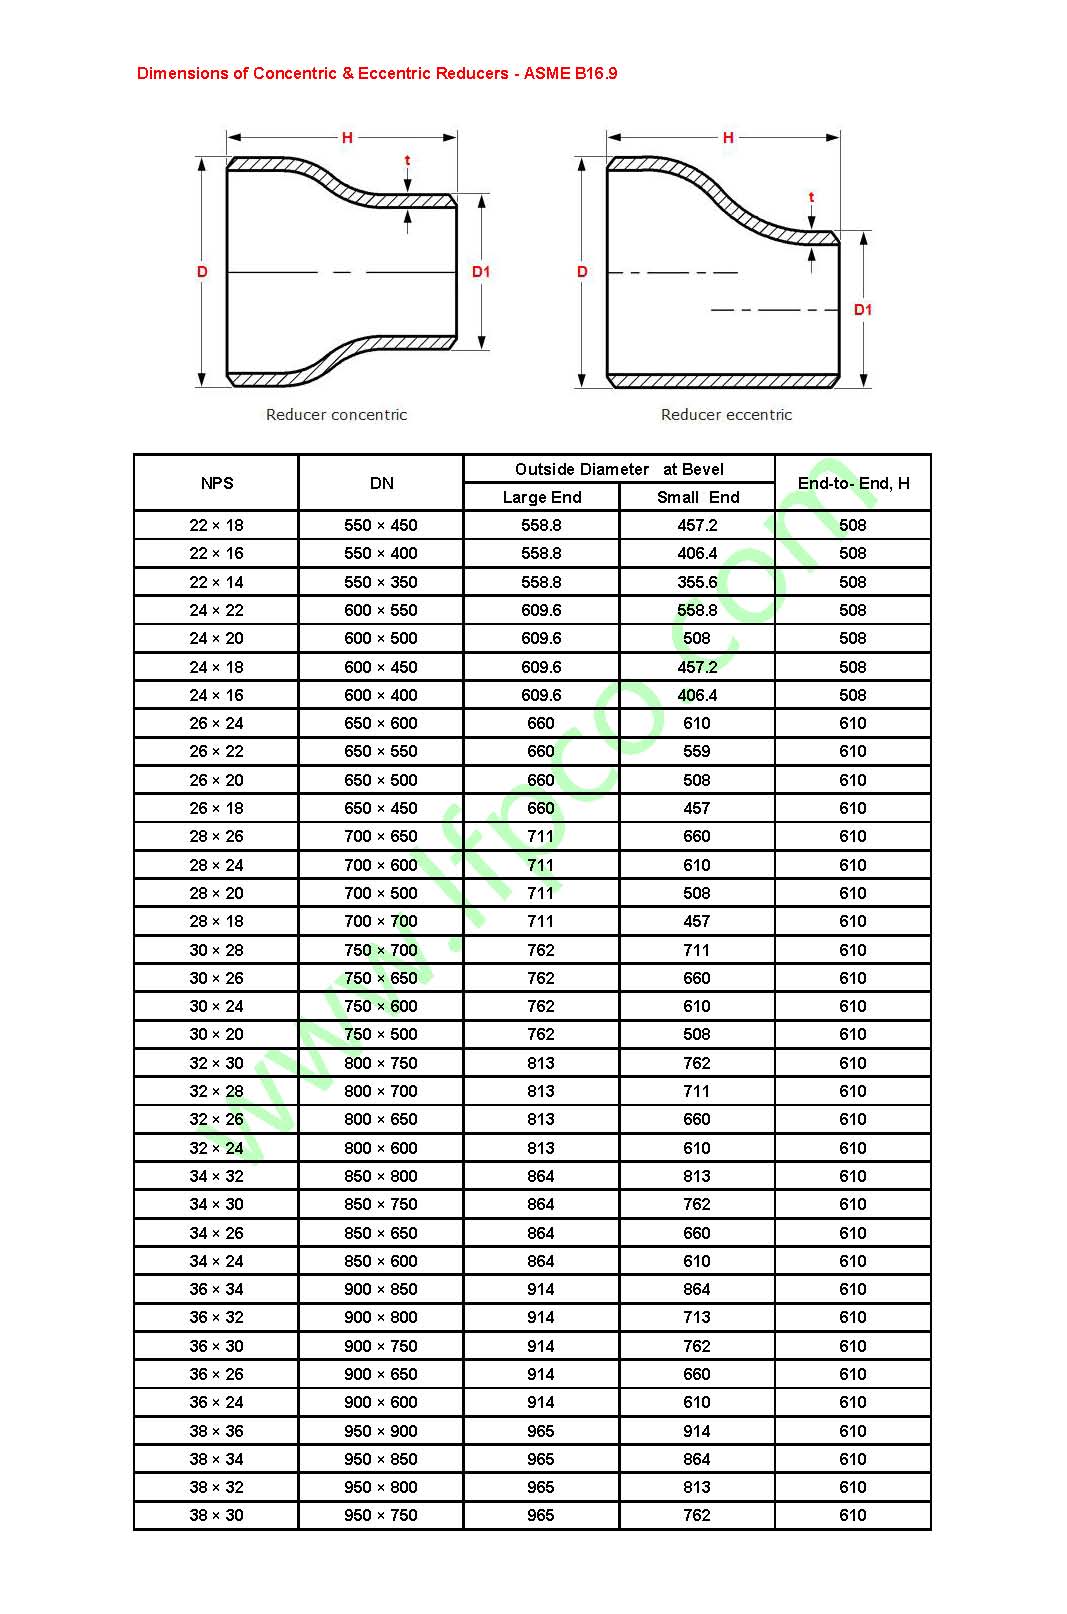 Dimensions of concentric and eccentric reducers – ASME B16.9 | A519